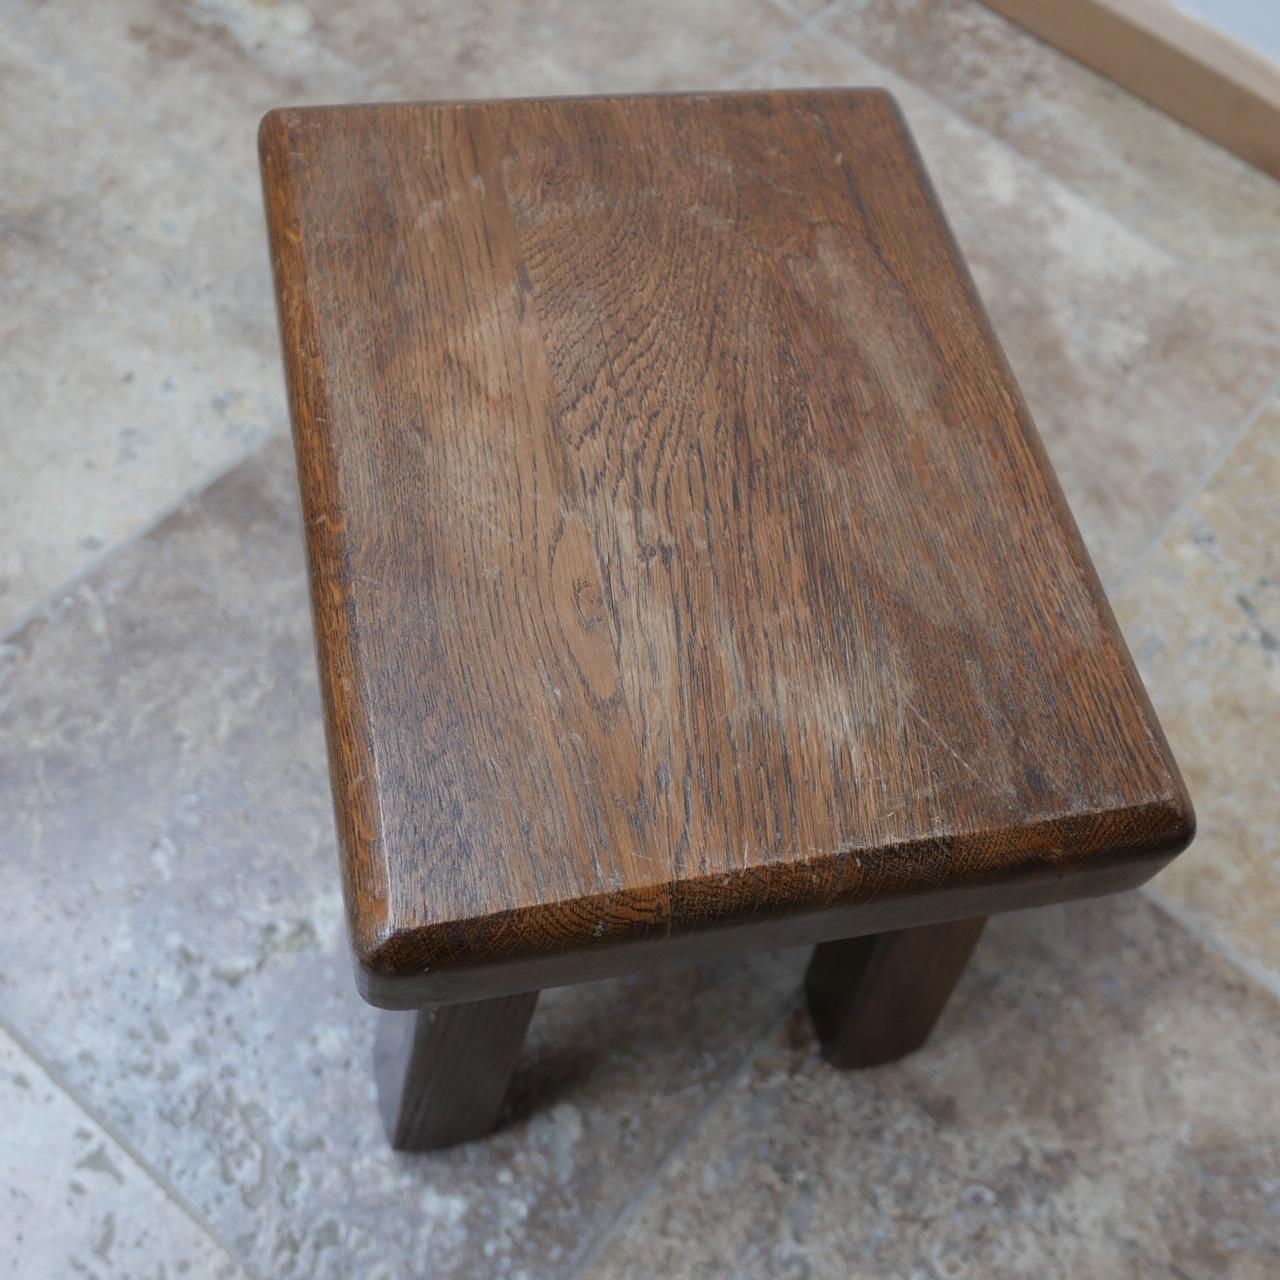 Dutch Midcentury Low Wooden Brutalist Stool or Side Tables